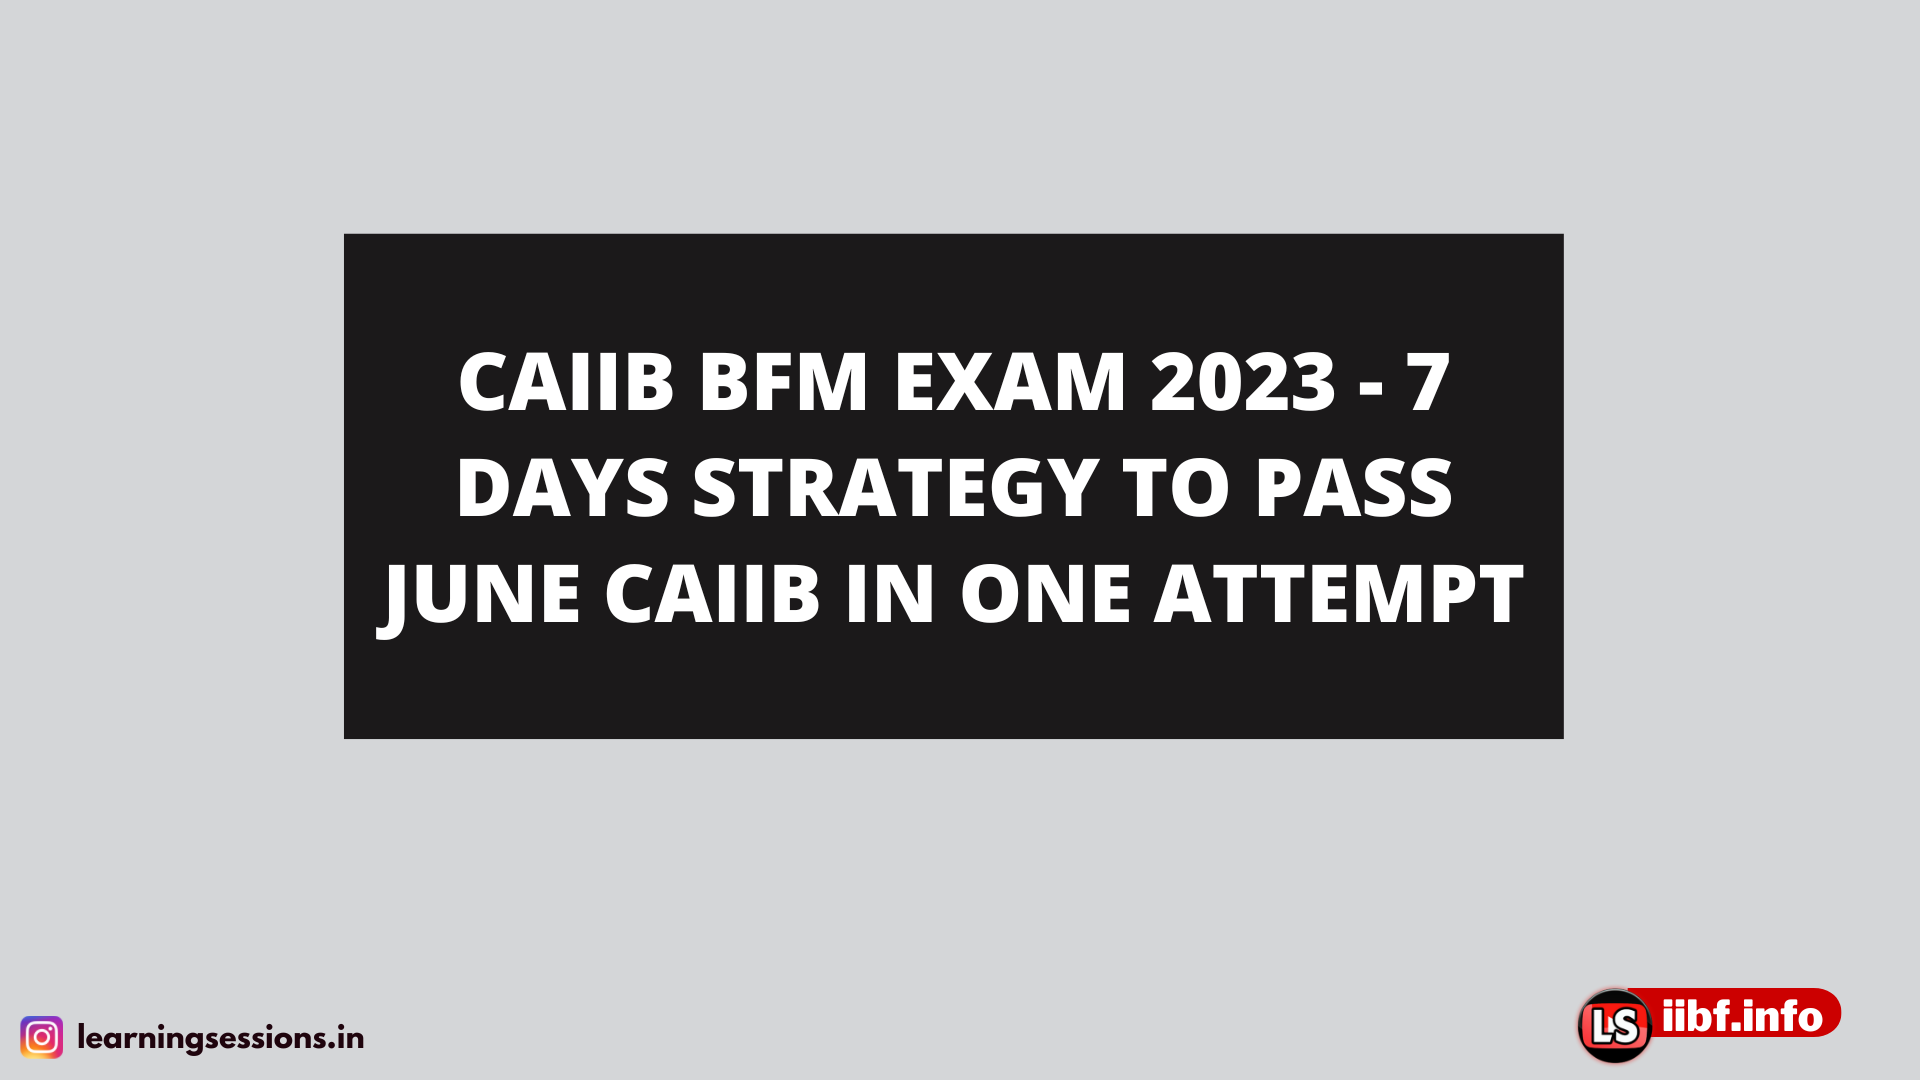 CAIIB BFM EXAM 2023 - 7 DAYS STRATEGY TO PASS JUNE CAIIB IN ONE ATTEMPT